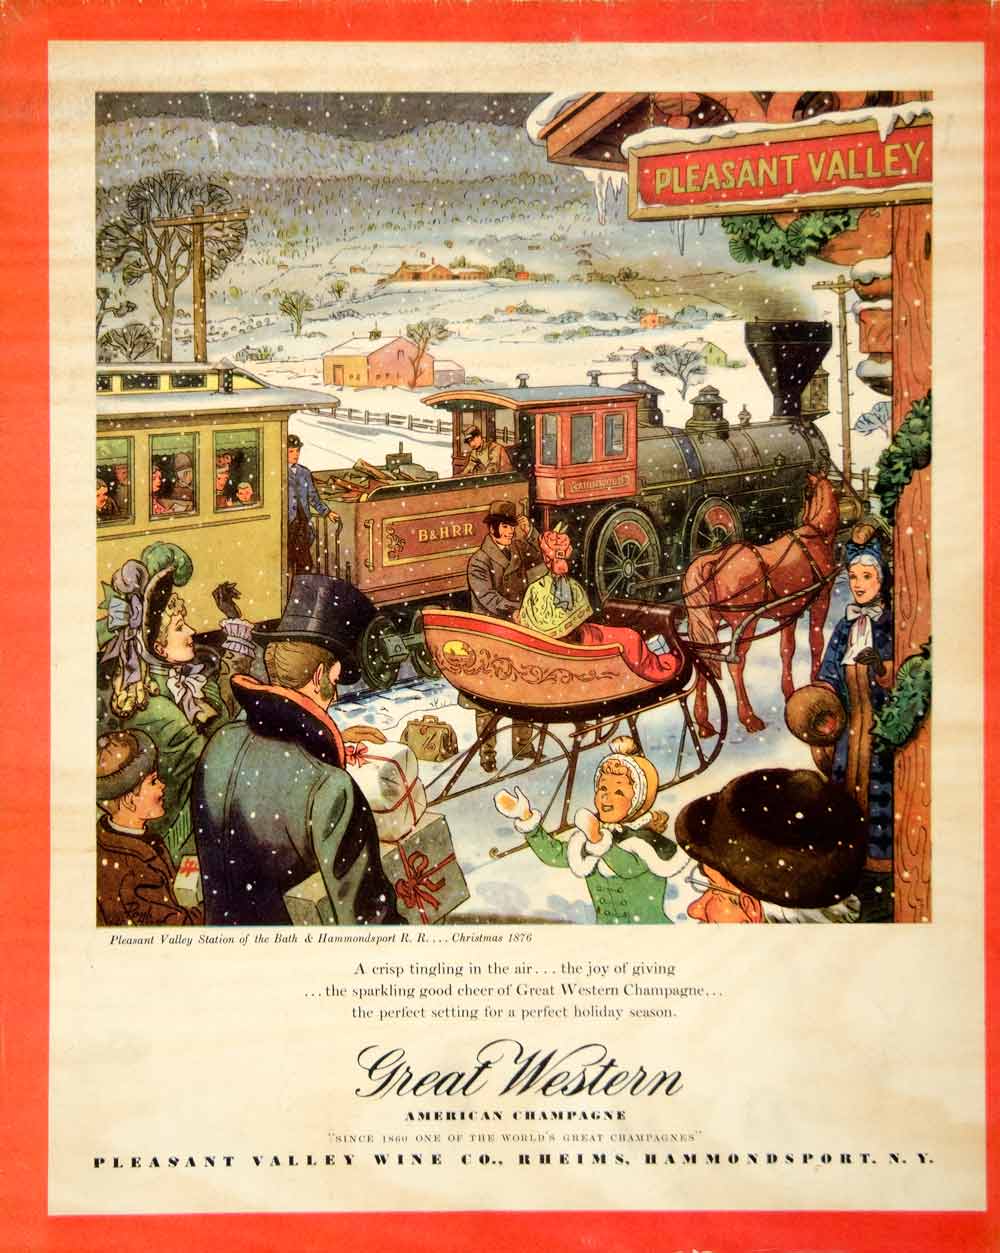 1946 Ad Great Western American Champagne Pleasant Valley Station Train FTM1